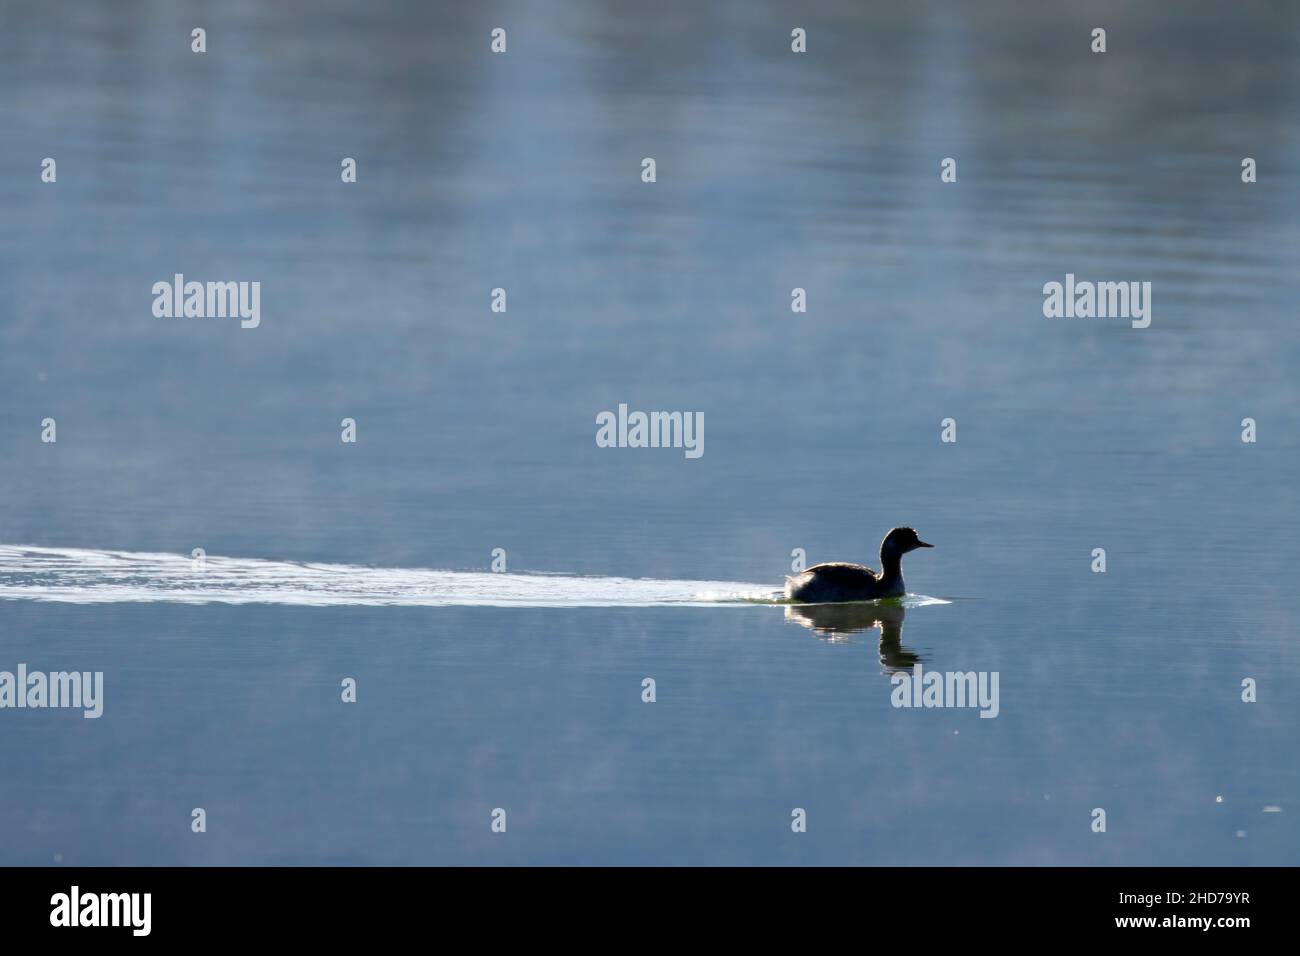 Pied-billed grebe (Podilymbus podiceps) silhouette at Lava Lake, Cascade Lakes National Scenic Byway, Deschutes National Forest, Oregon. Stock Photo